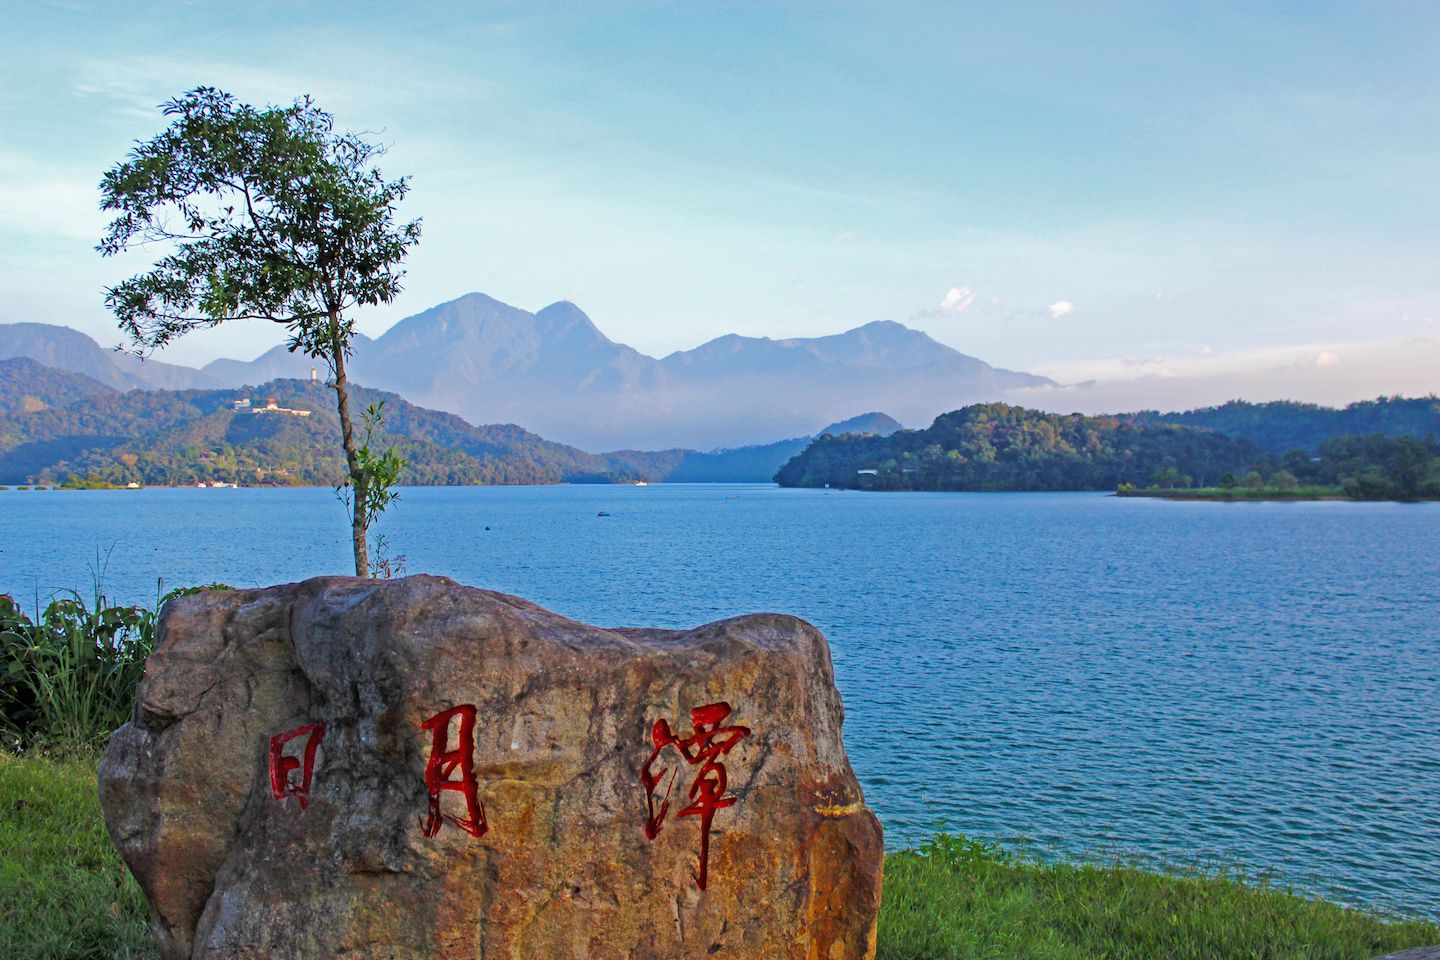 Rock with Sun Moon Lake inscribed on it